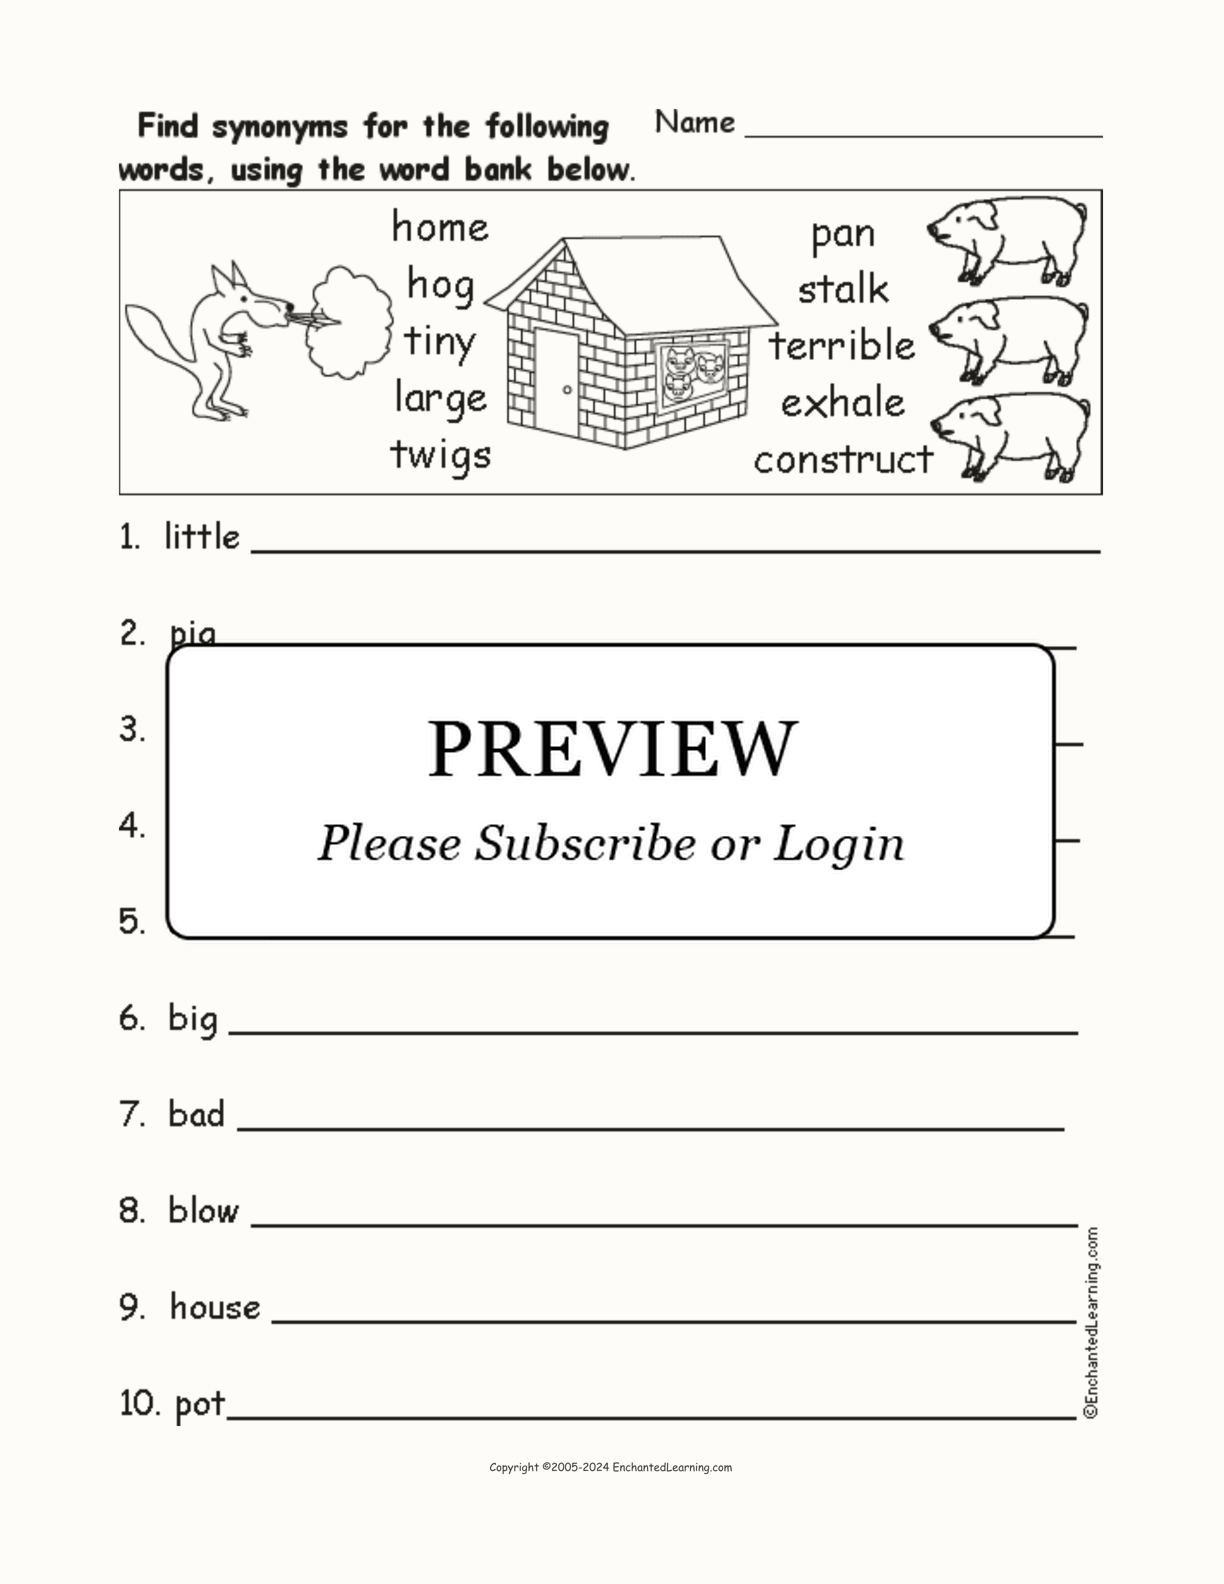 'Three Little Pigs' Synonyms interactive worksheet page 1